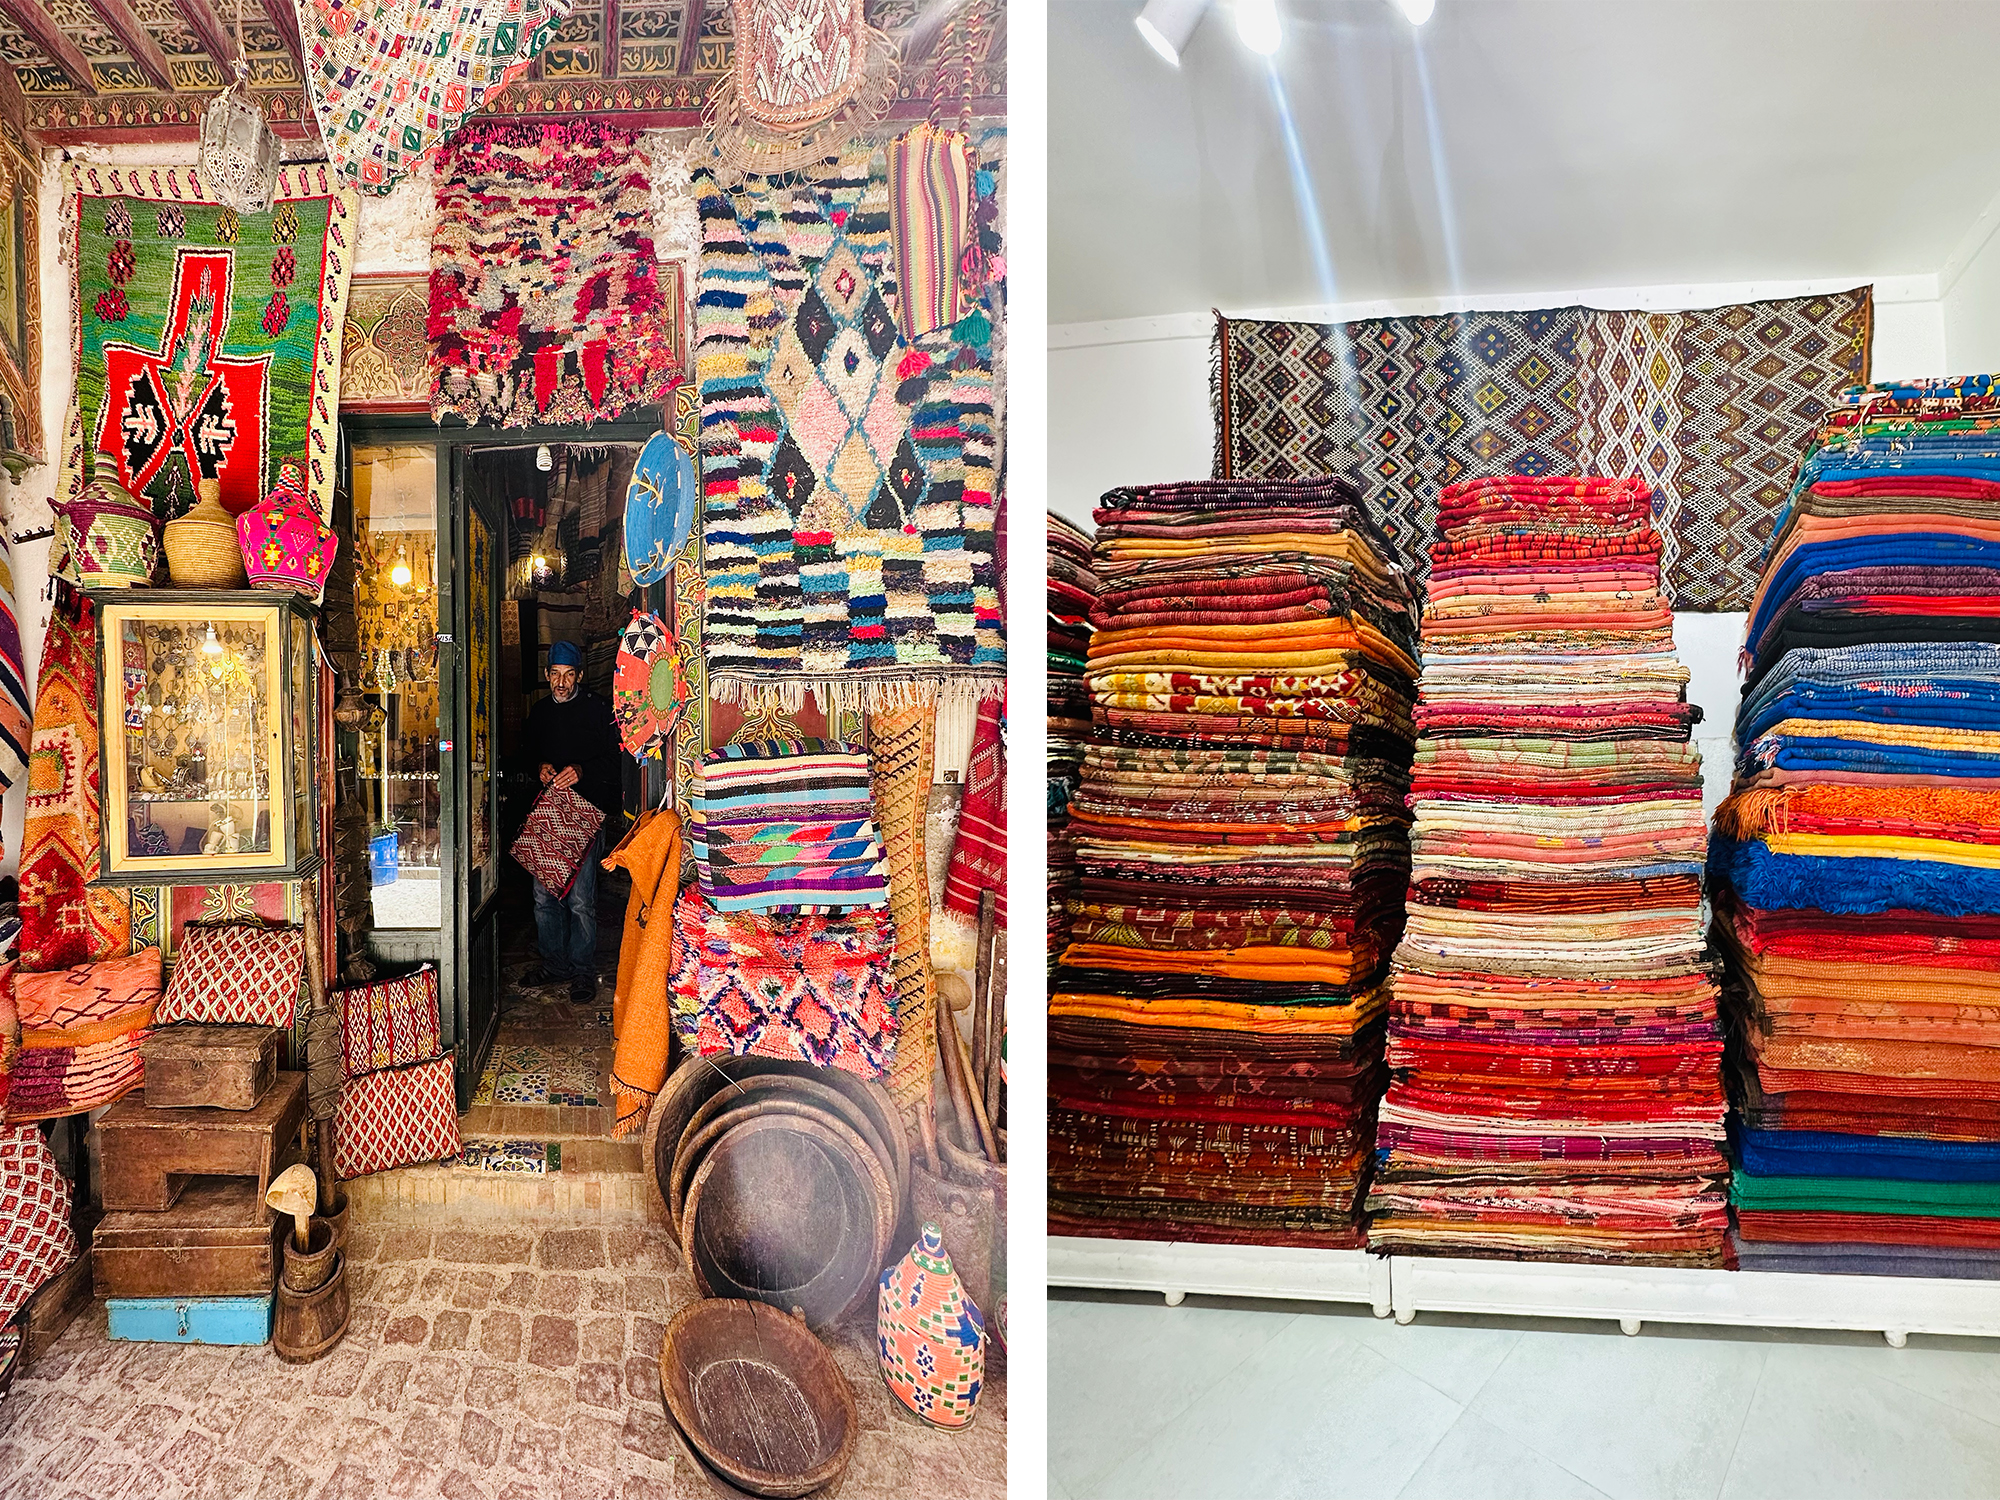 Euphoric Threads Travel Blog - Euphoric Escapades - The Adventures of Griffindor - The Ultimate Travel Guide to Shopping in Morocco. Essaouria shopping guide - berber carpet shopping